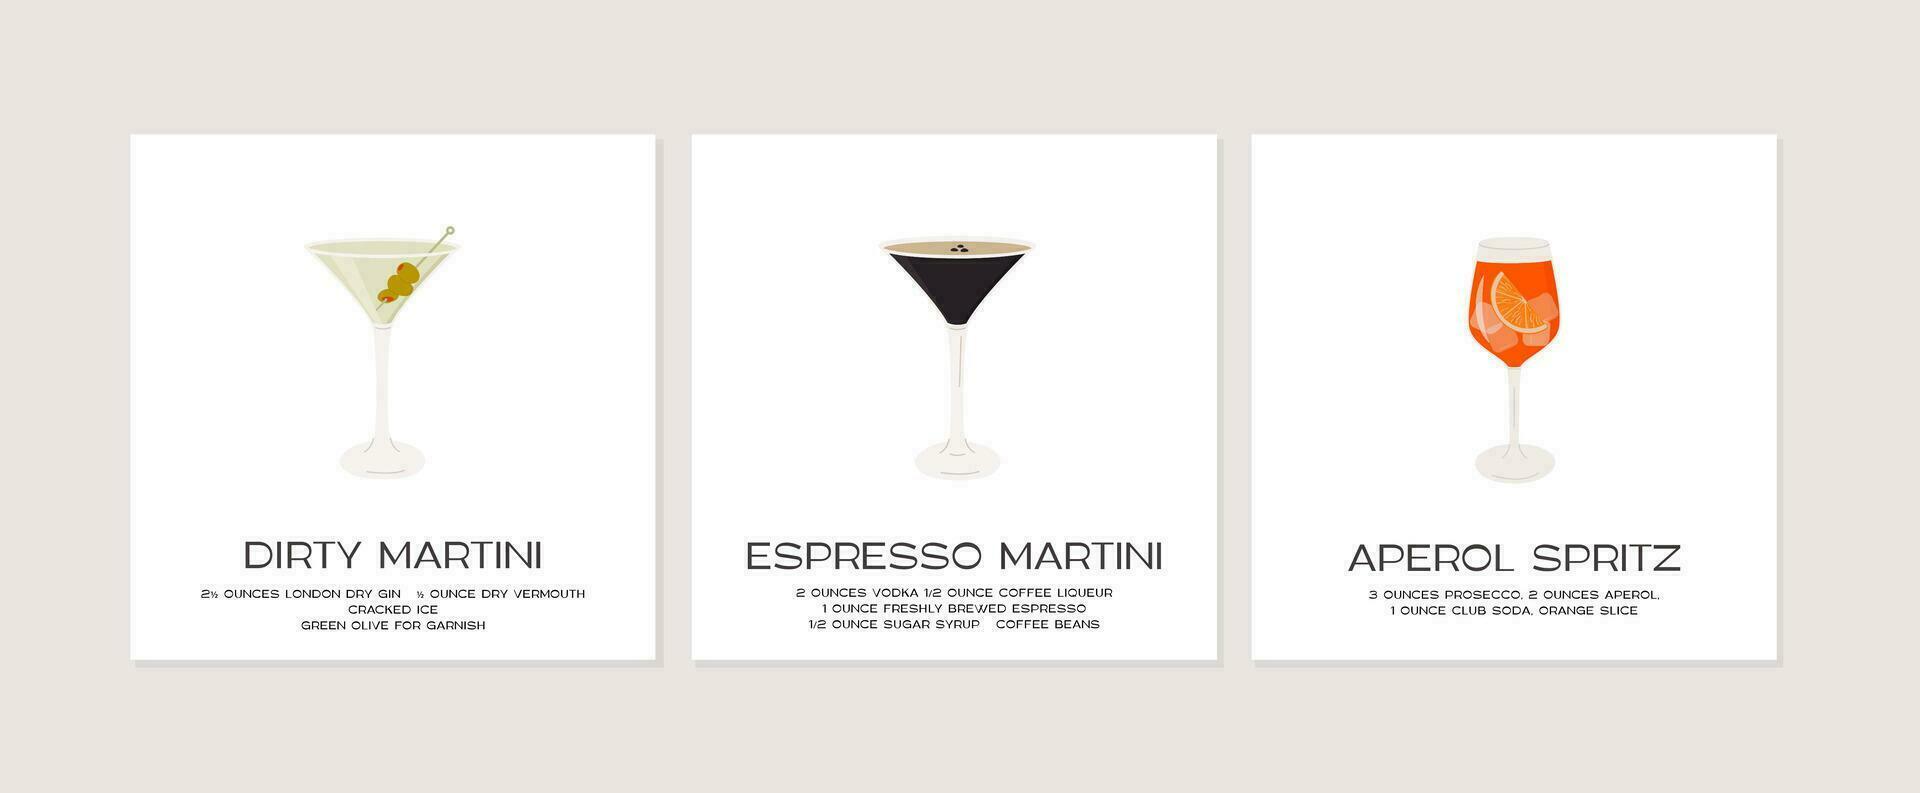 Espresso Martini garnished with coffee beans. Aperol Campari Spritz Cocktail in glass with ice. Dirty Martini and olives on skewer. Minimal print with alcoholic beverage on white background. Vector. vector